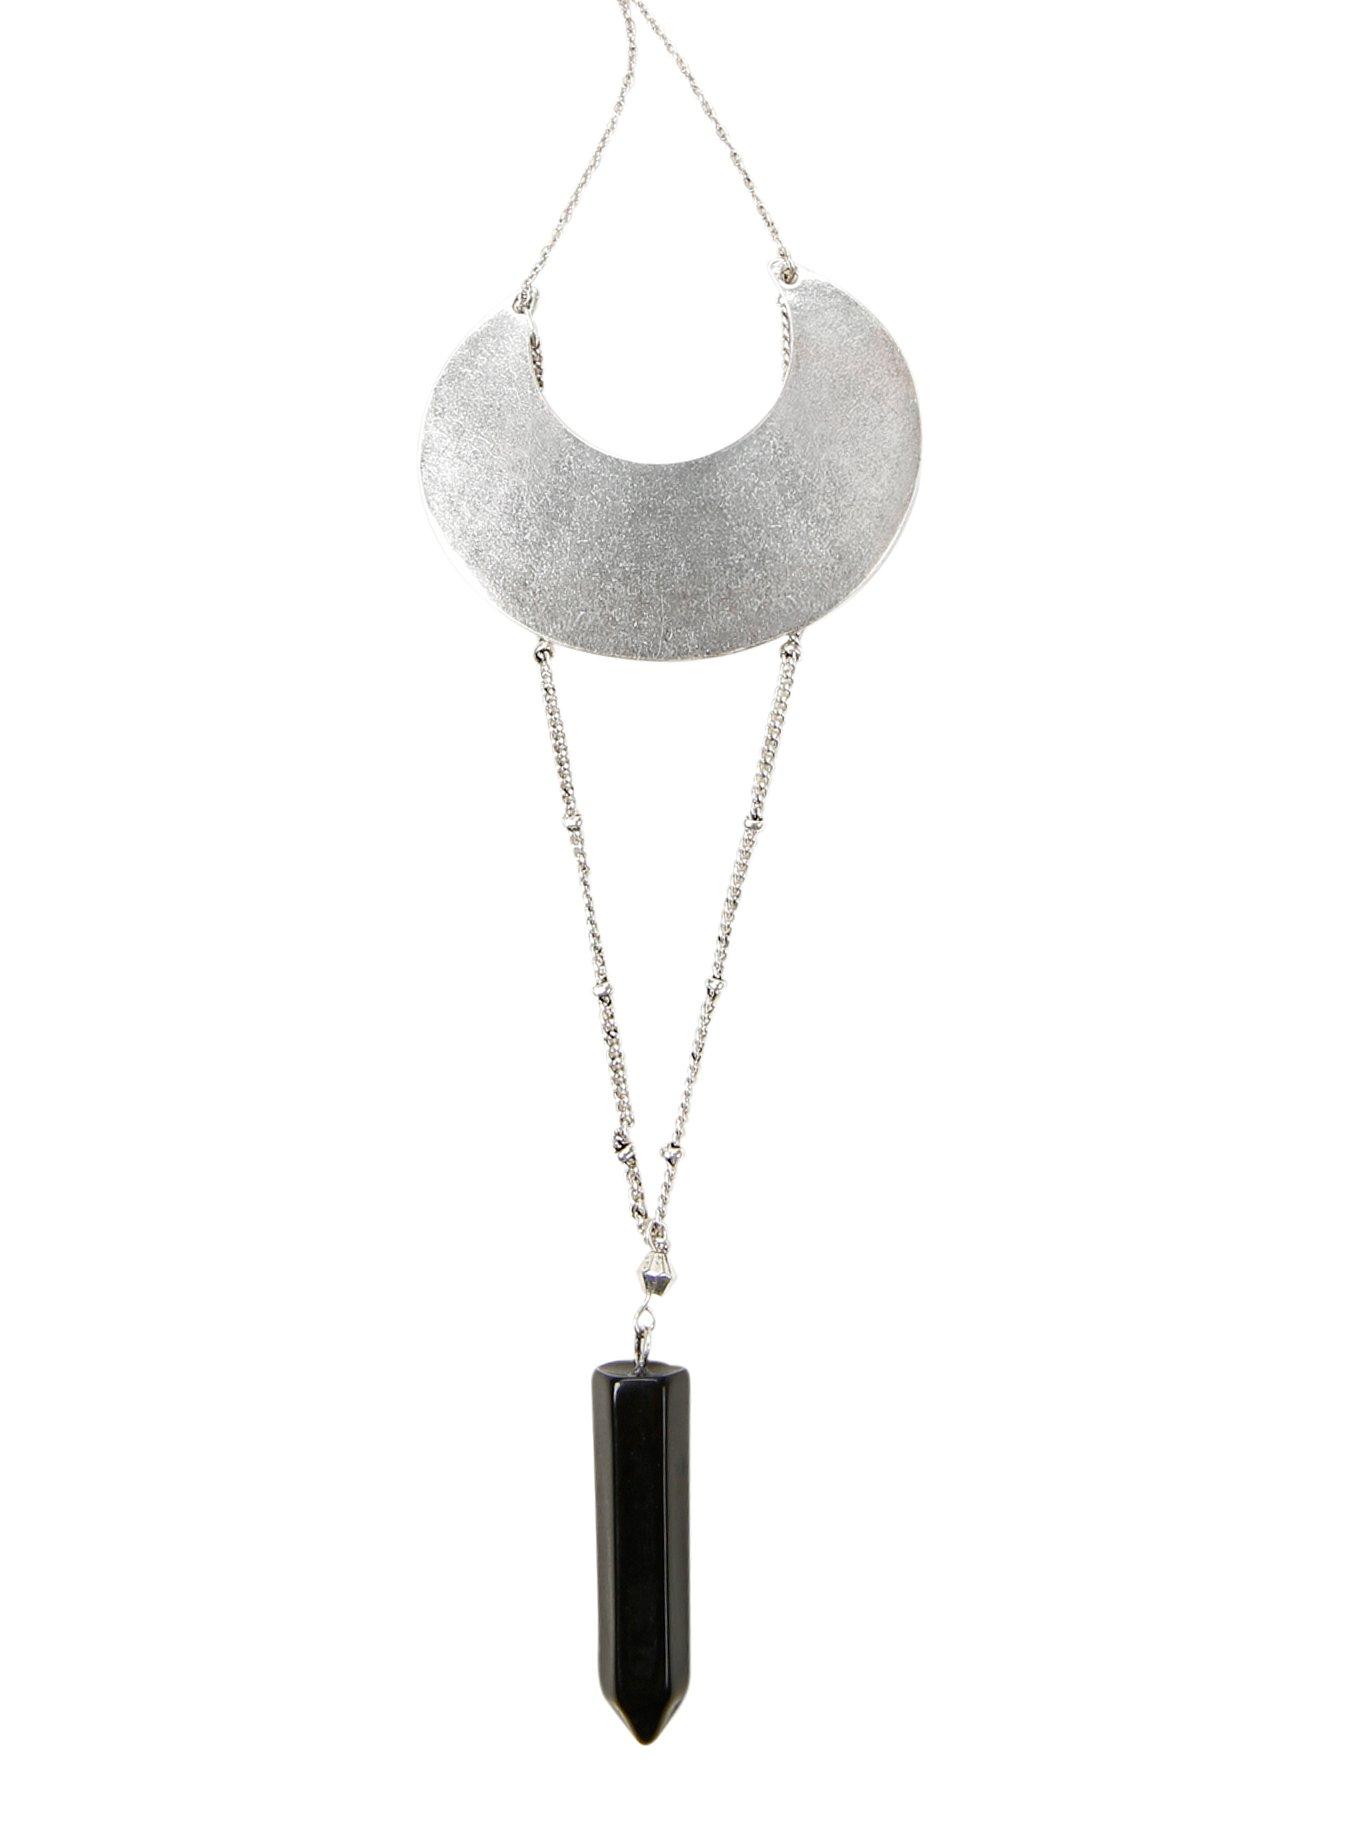 Black Crystal & Silver Shield Long Chain Necklace, , hi-res